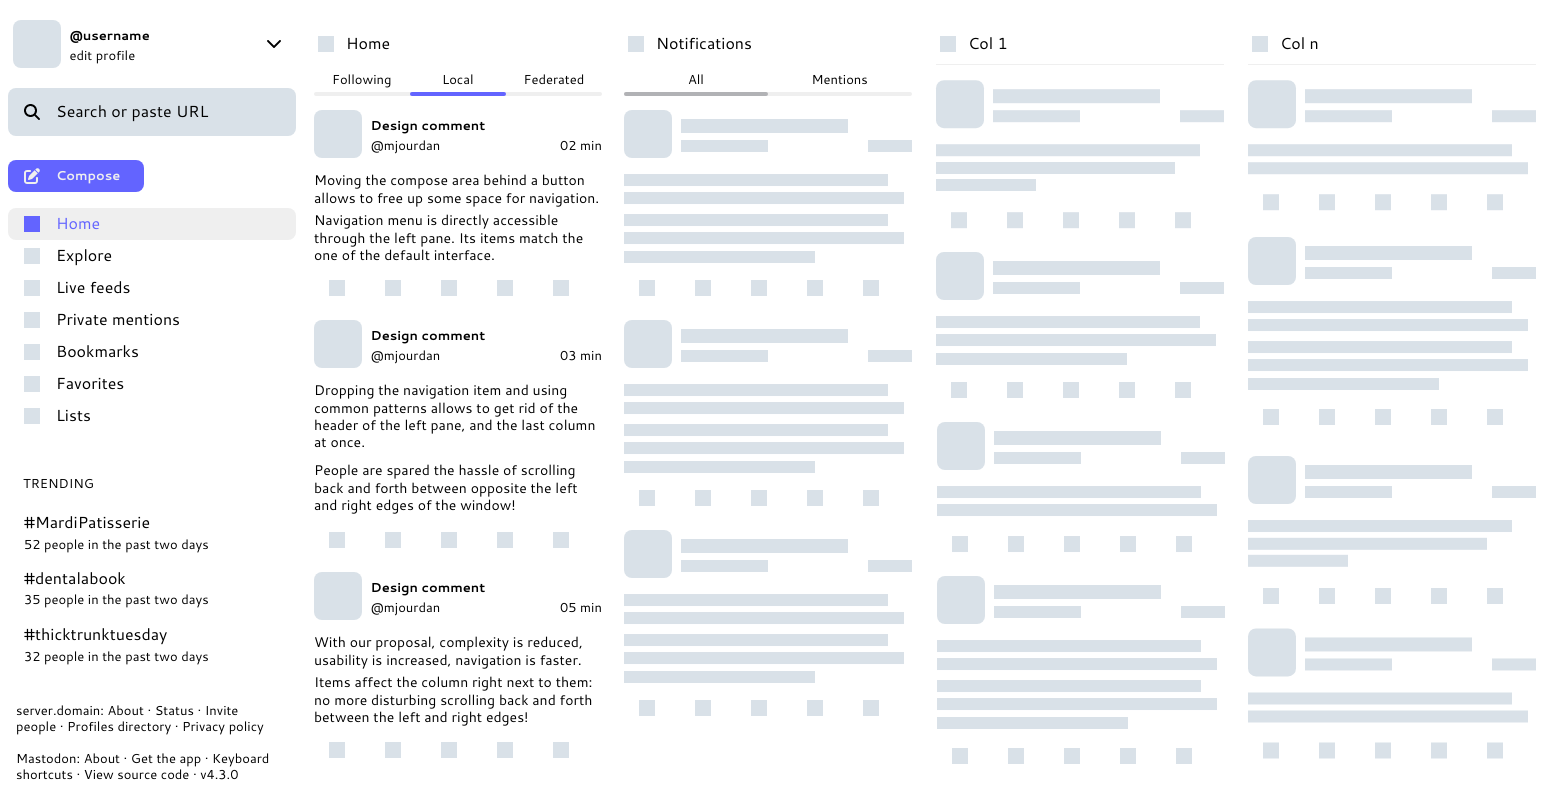 Mockup of what could become the multi-column view in mastodon. App content features real comments about the designs.